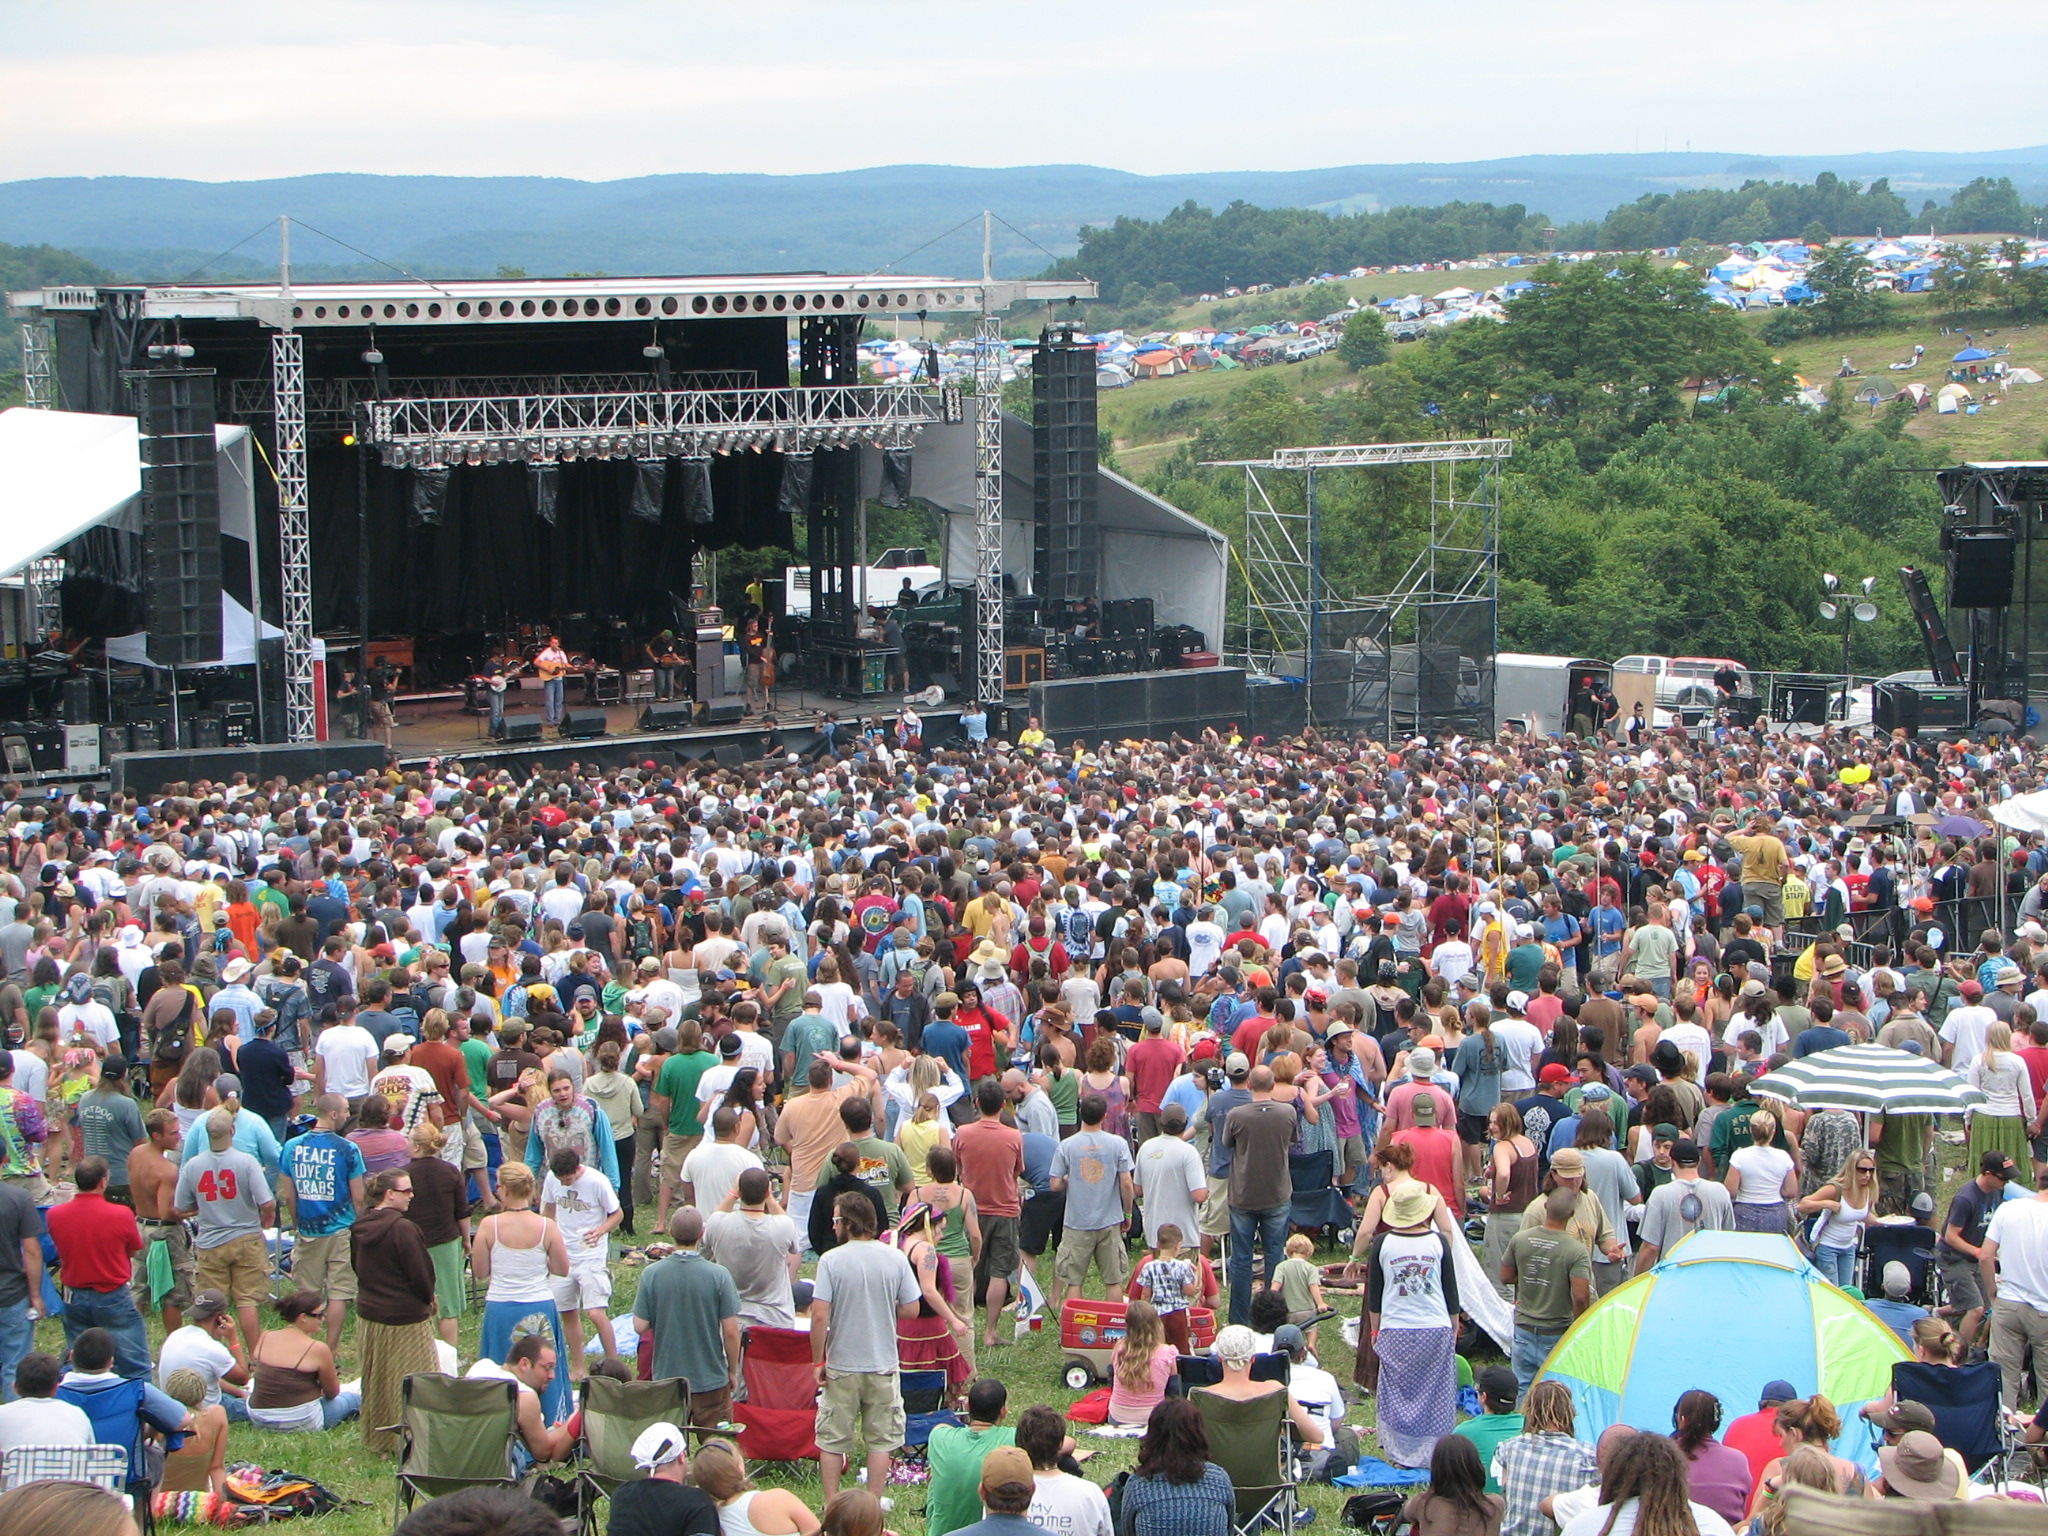 large crowd of people at a music festival